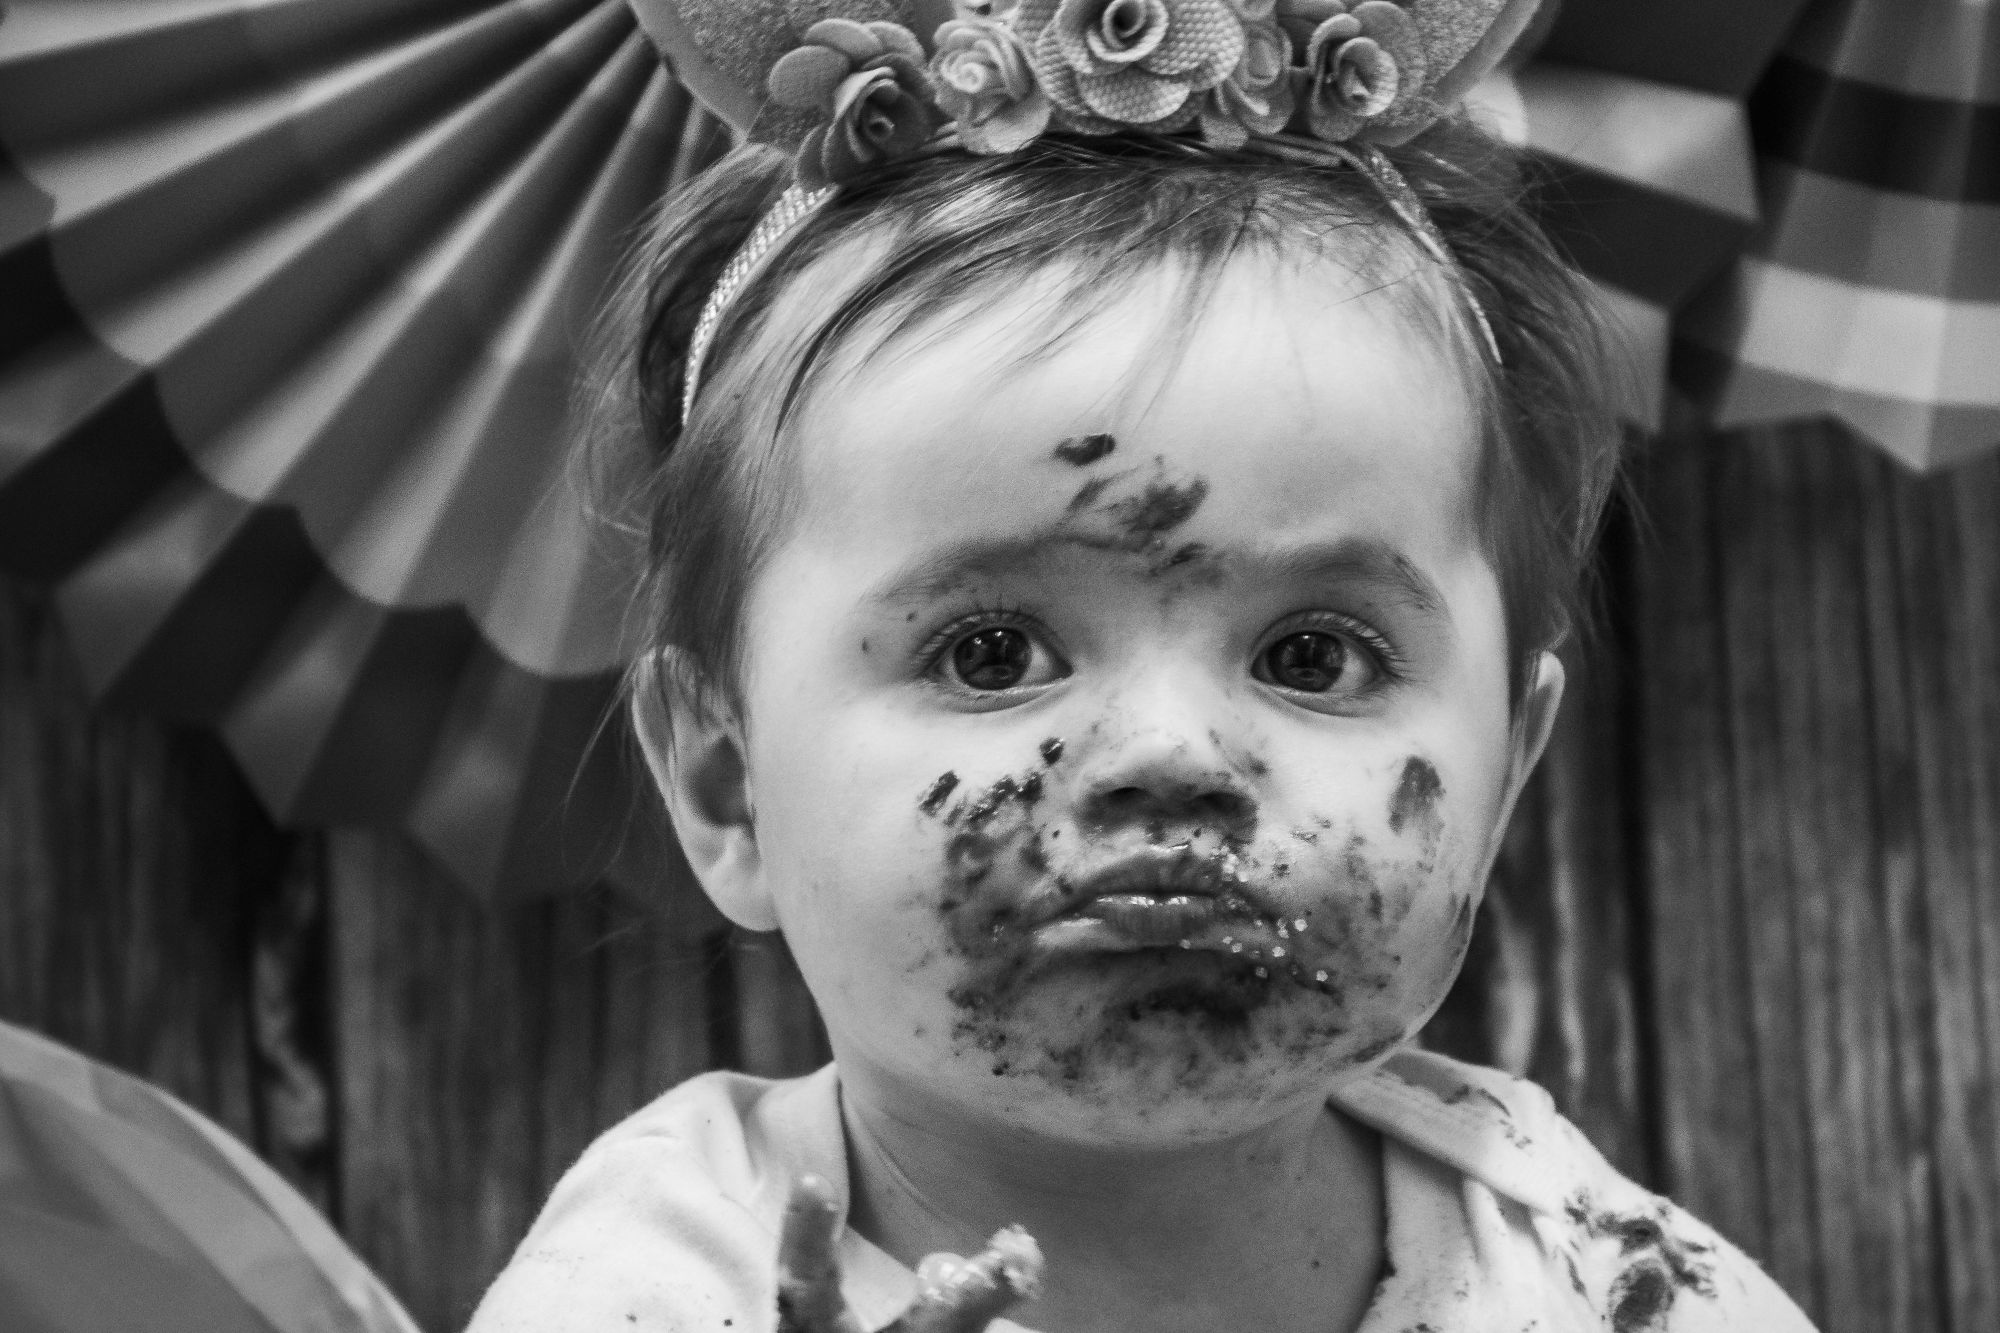 Cake smash first birthday celebration - a little girl is photographed with chocolate cake all over her face